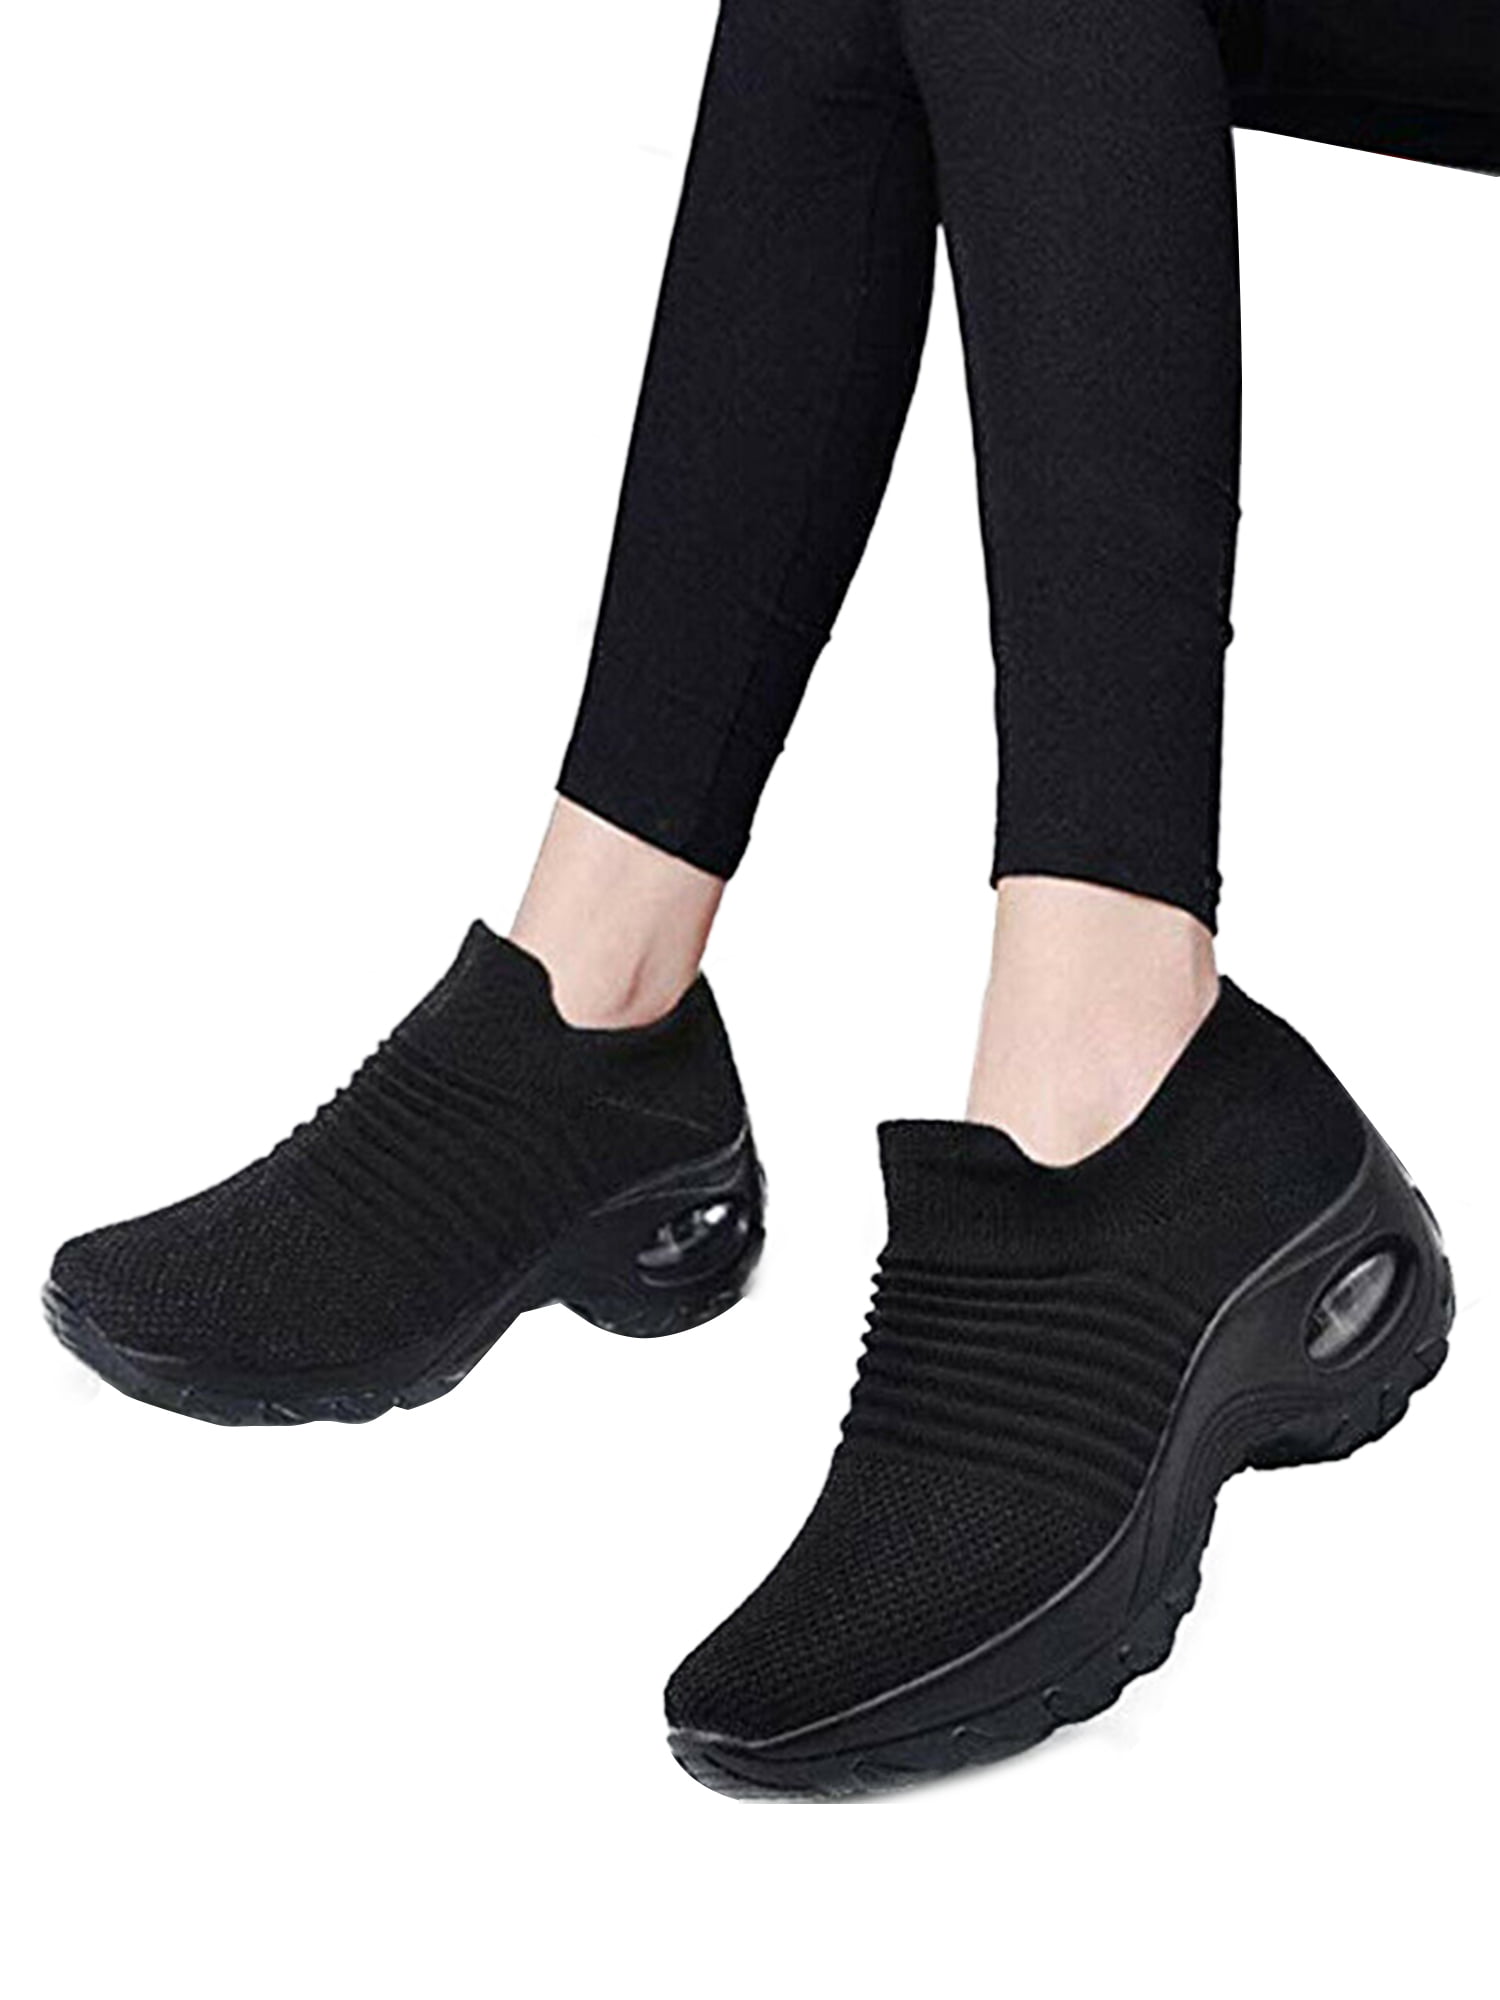 Girls Boys Sport Stretch Mesh Shoes Sock Kids Baby Running Sneakers Trainer BW 